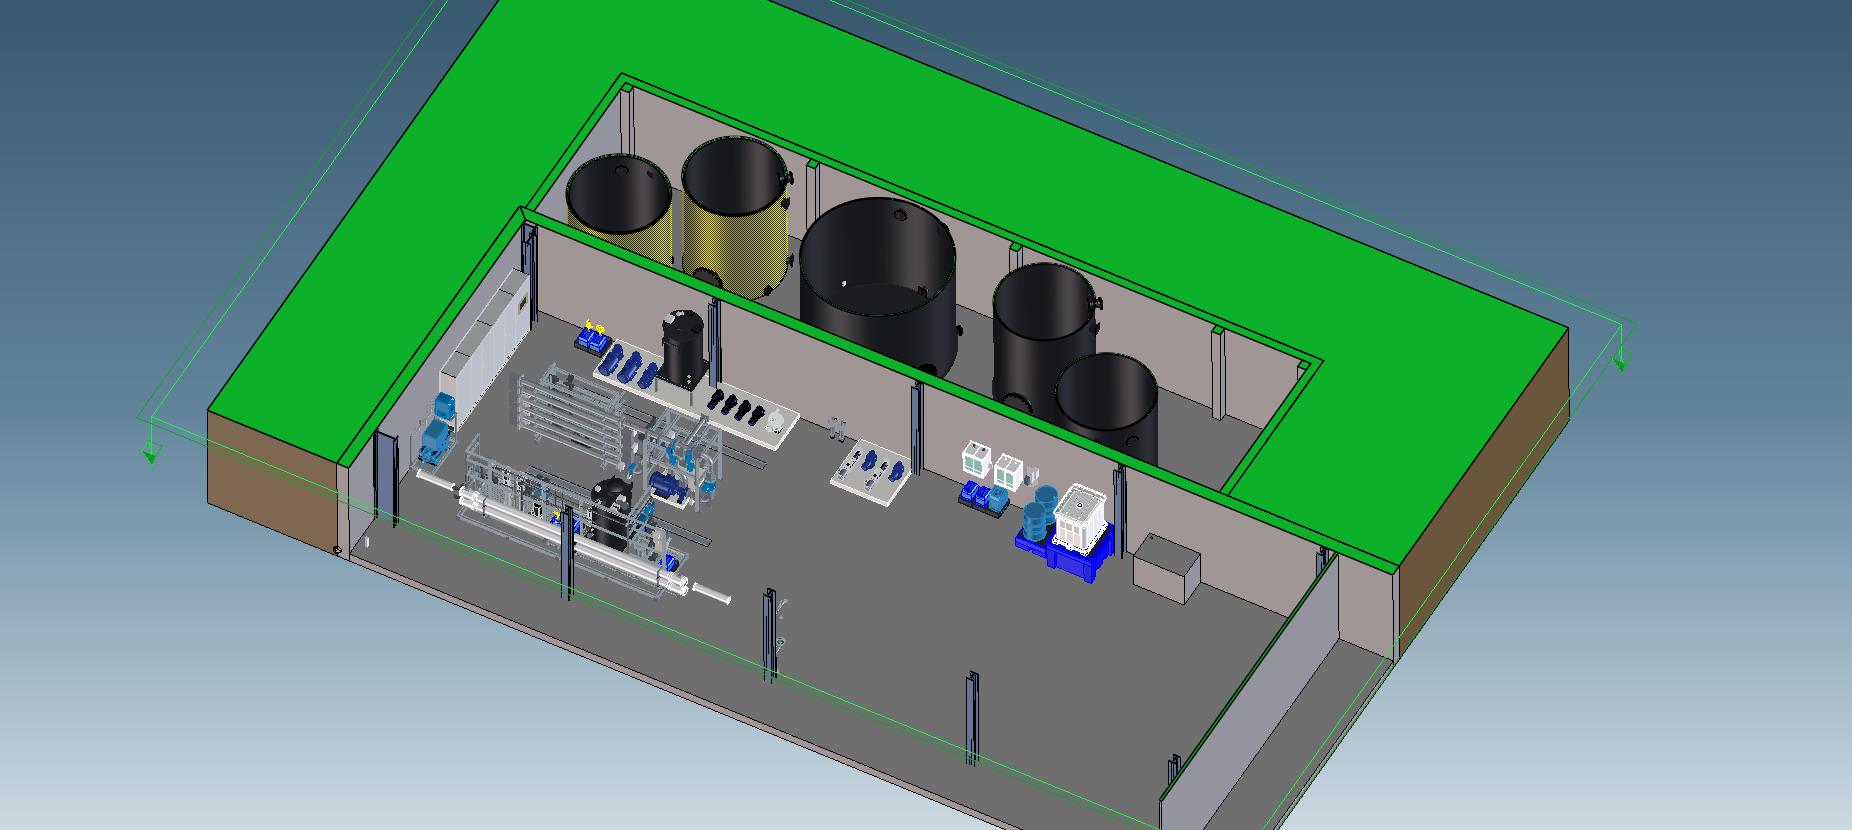 RECYCLING SYSTEM FOR THE TREATMENT & USE OF LAUNDRY WASTEWATER - WEHRLE